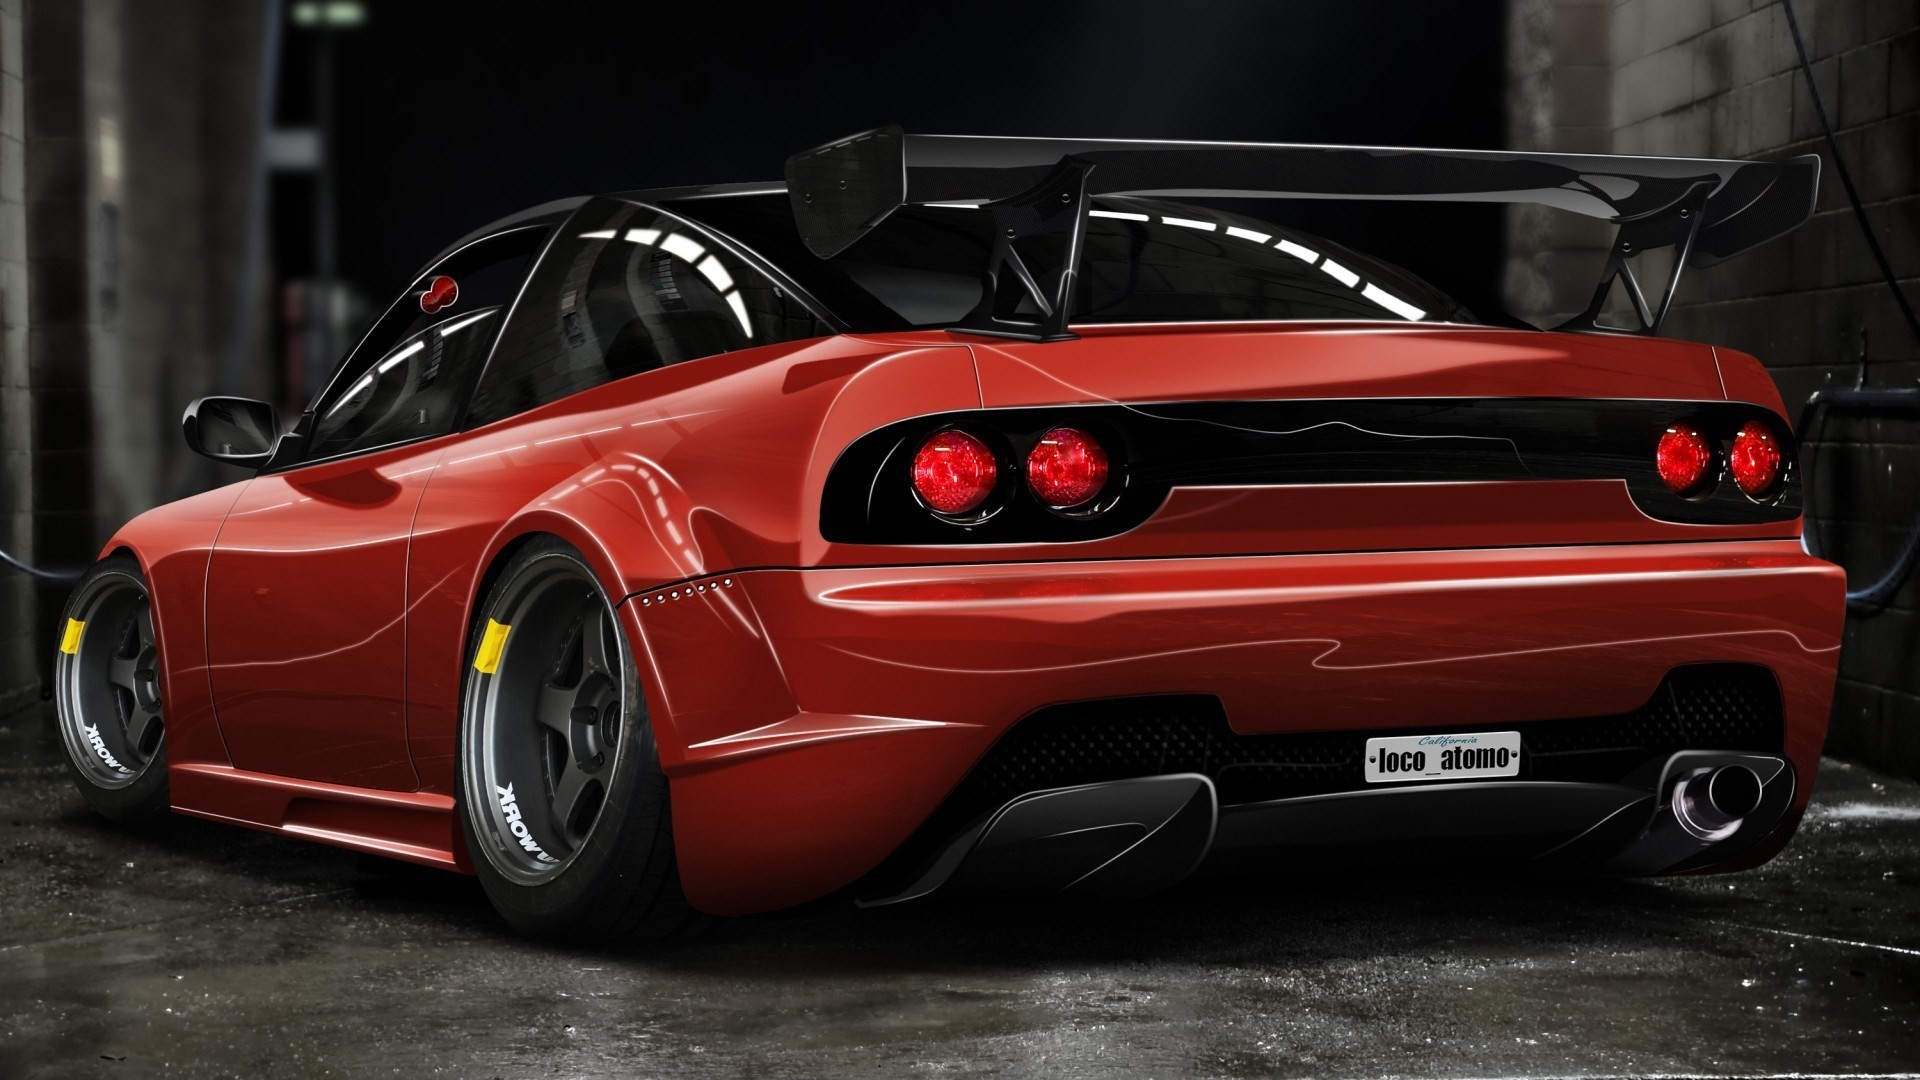 1920x1080 1932722, beautiful pictures of nissan 240sx